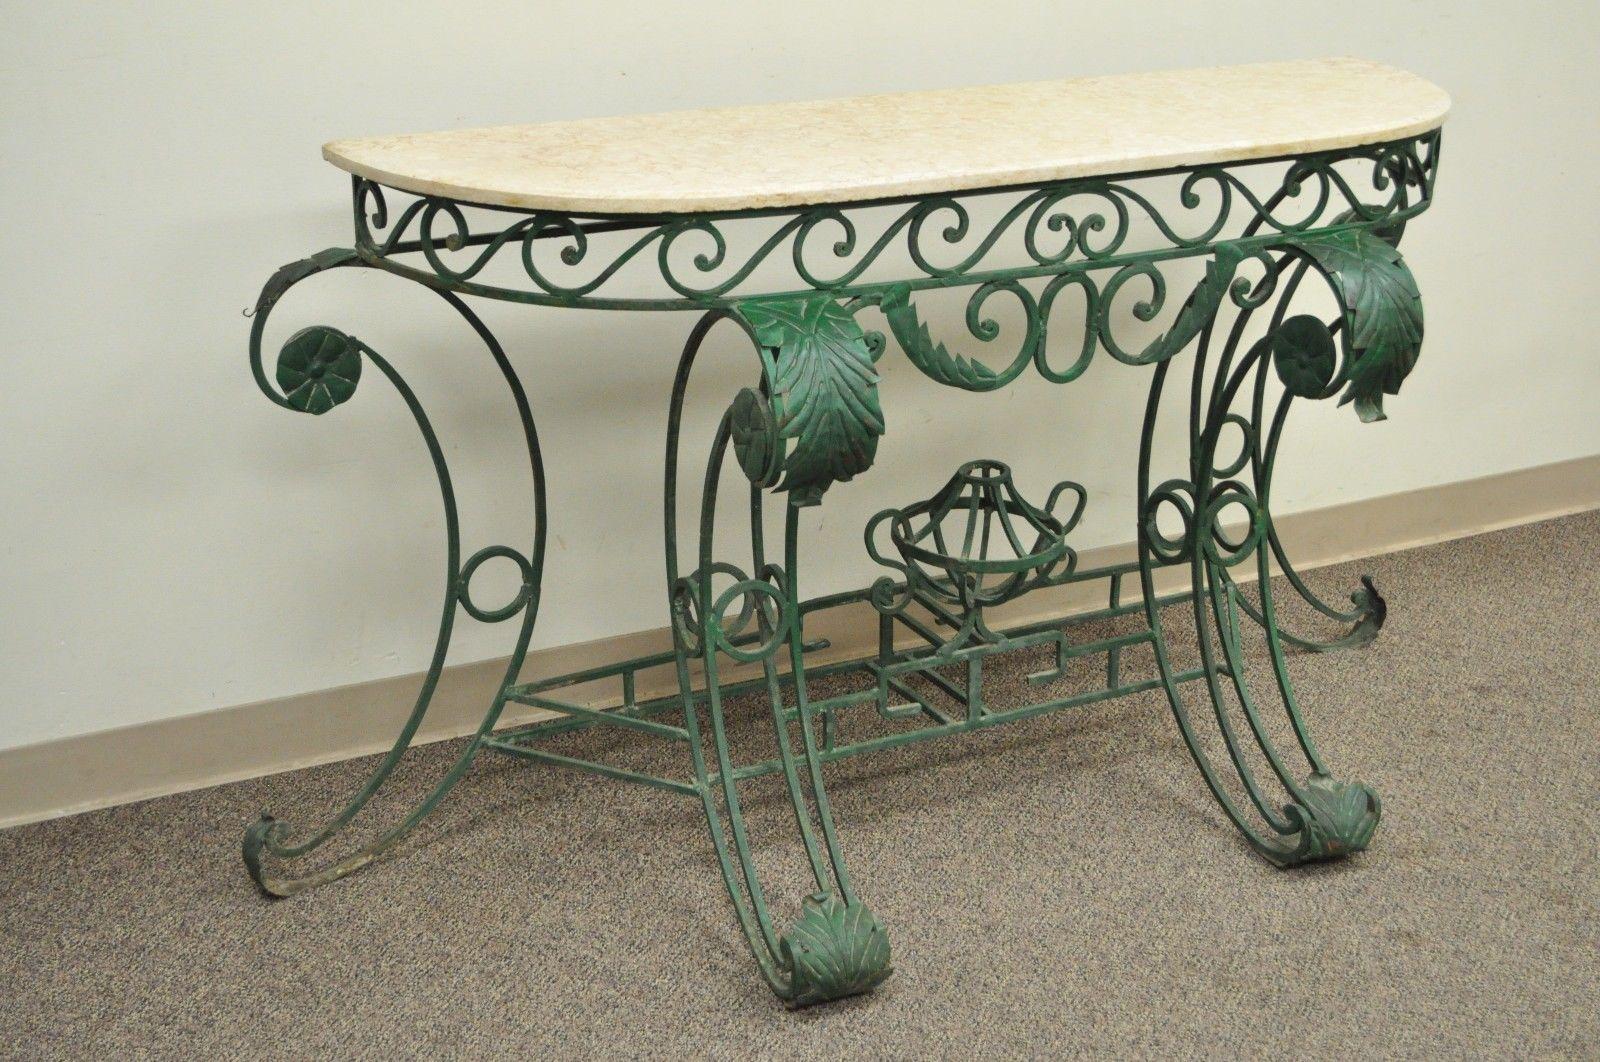 Decorator Italian Regency style iron marble-top console table. Item features scrolling wrought iron frame, urn stretcher, shaped marble top, and green painted finish, circa late 20th century, contemporary. Measurements: 35